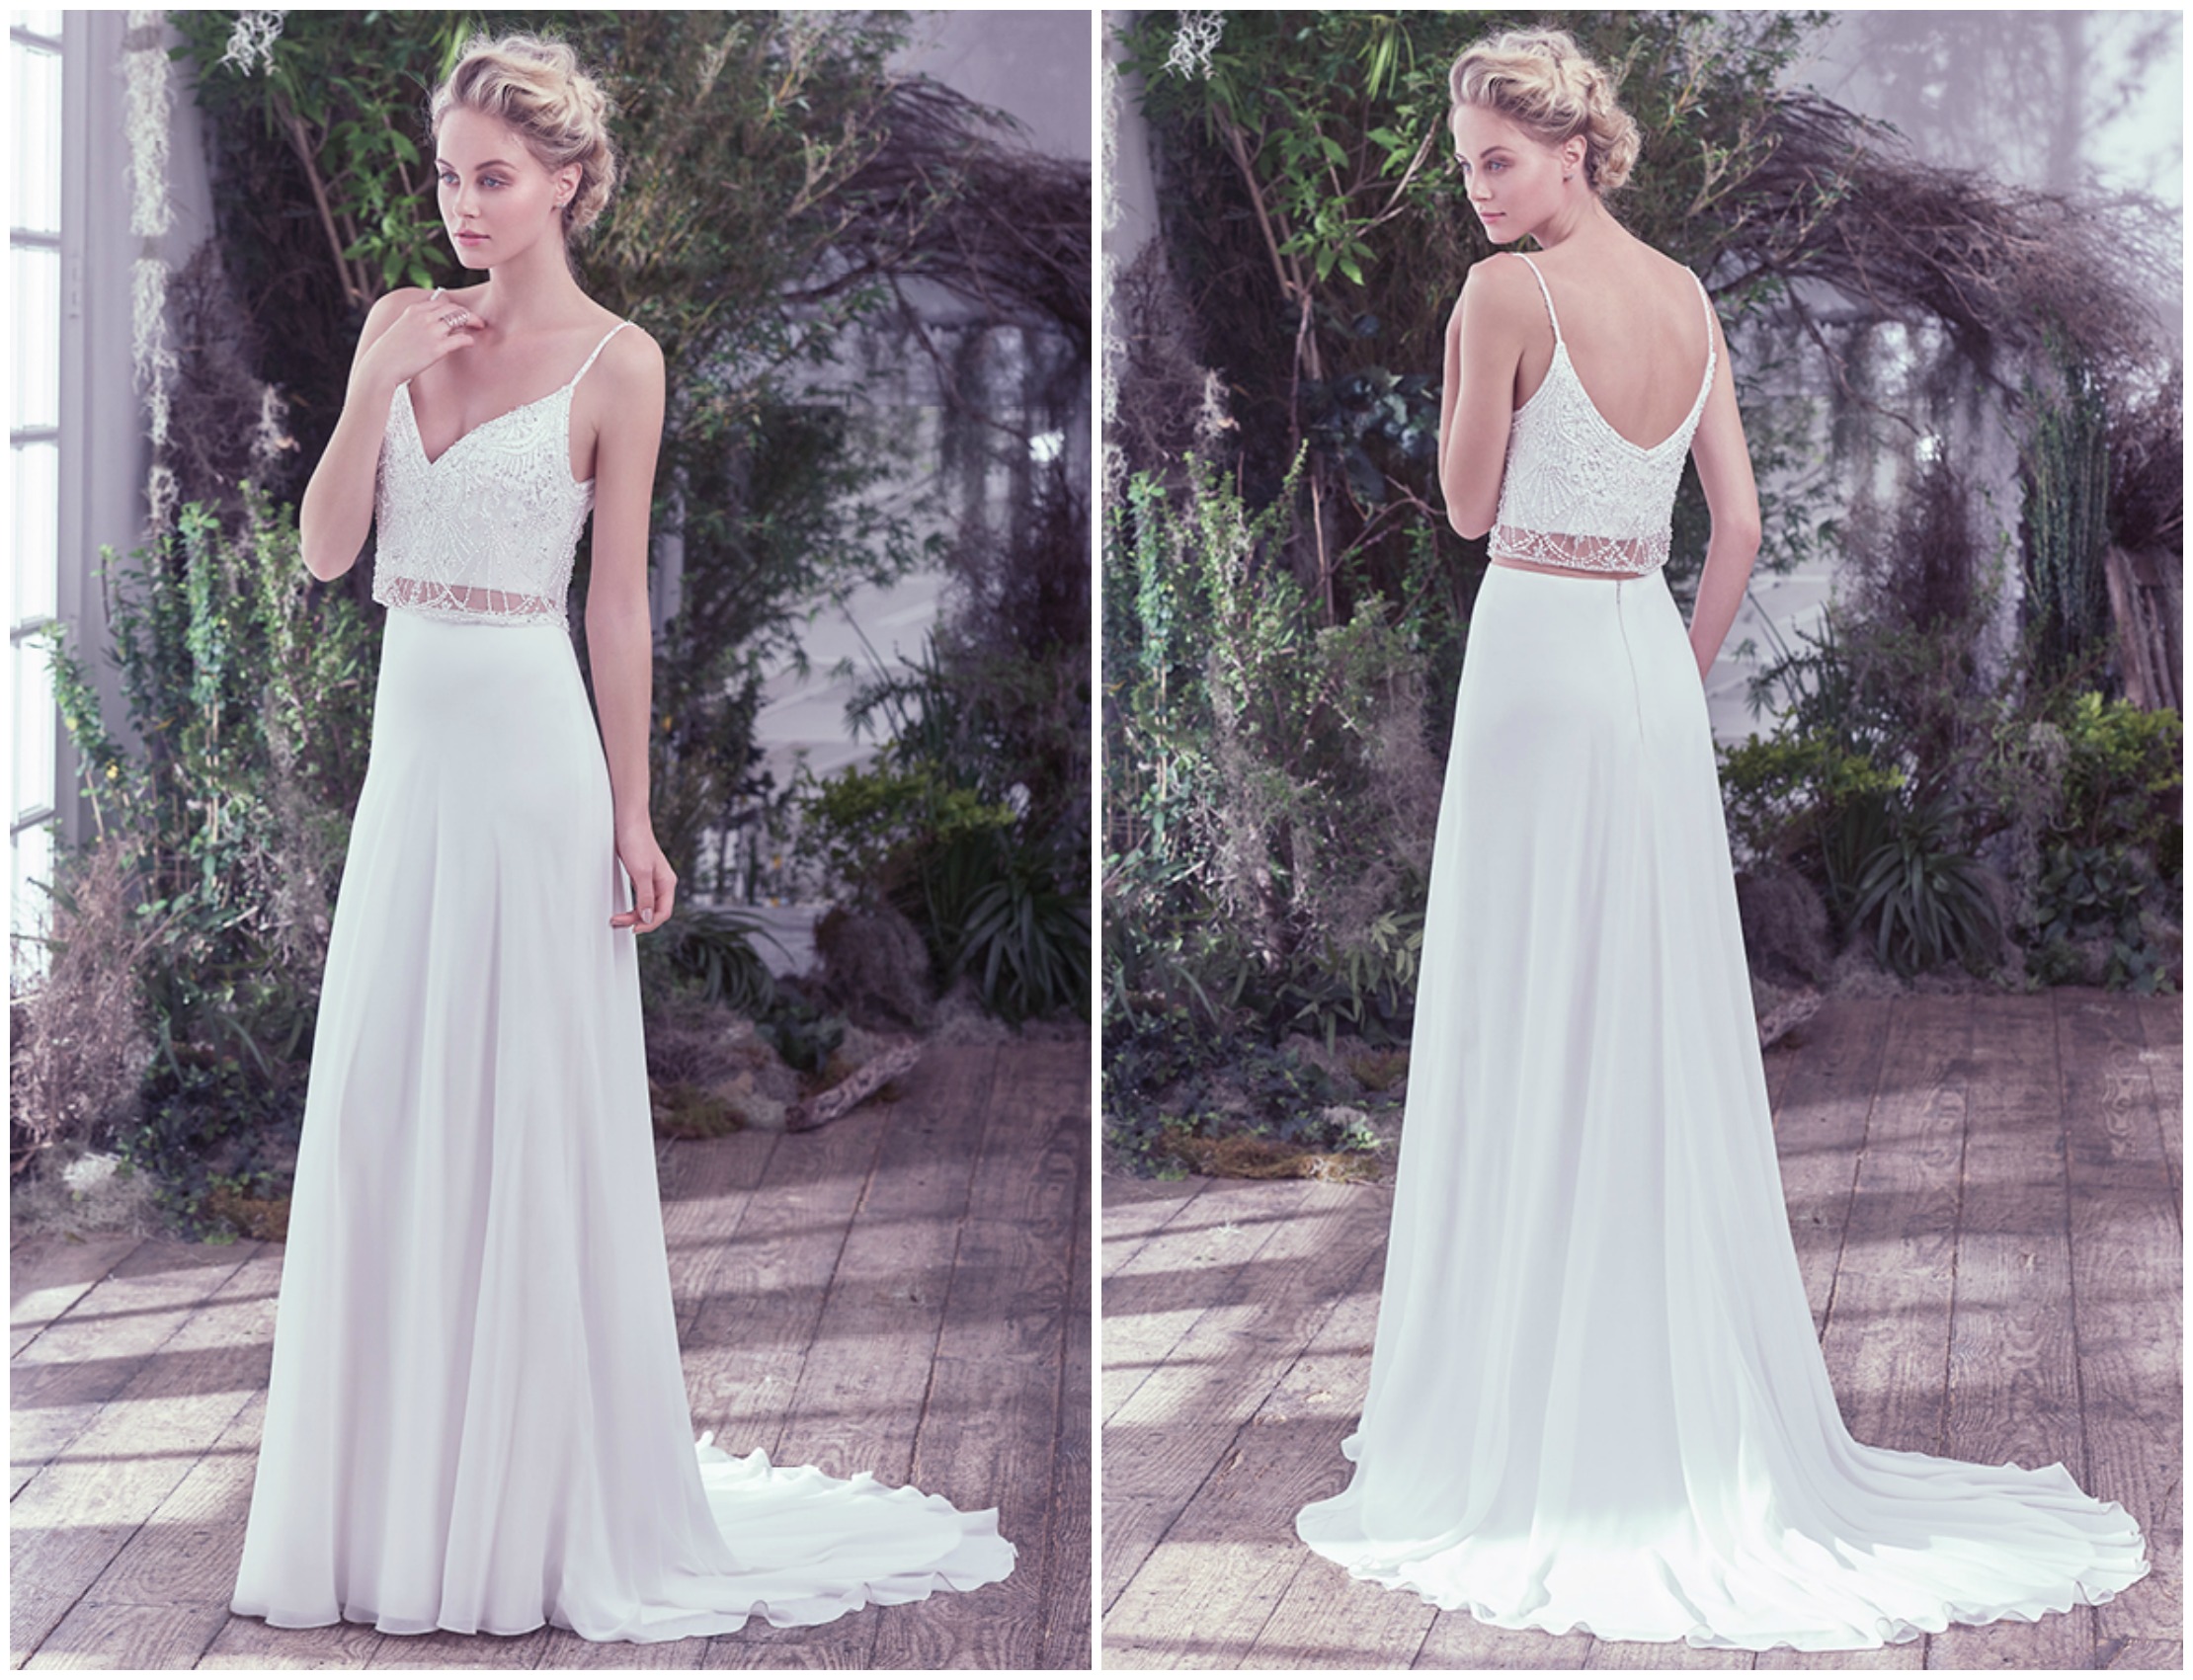 Effortlessly chic, this Arlo chiffon and tulle two-piece wedding dress, with a Swarovski crystal and tonal bead embellished bodice overlay and sheer midriff, adds an ethereal twist to this classic sheath silhouette. Complete with a soft V-neckline and scoop back. Finished with zipper closure.

<a href="https://www.maggiesottero.com/maggie-sottero/griffyn/9762" target="_blank">Maggie Sottero</a>